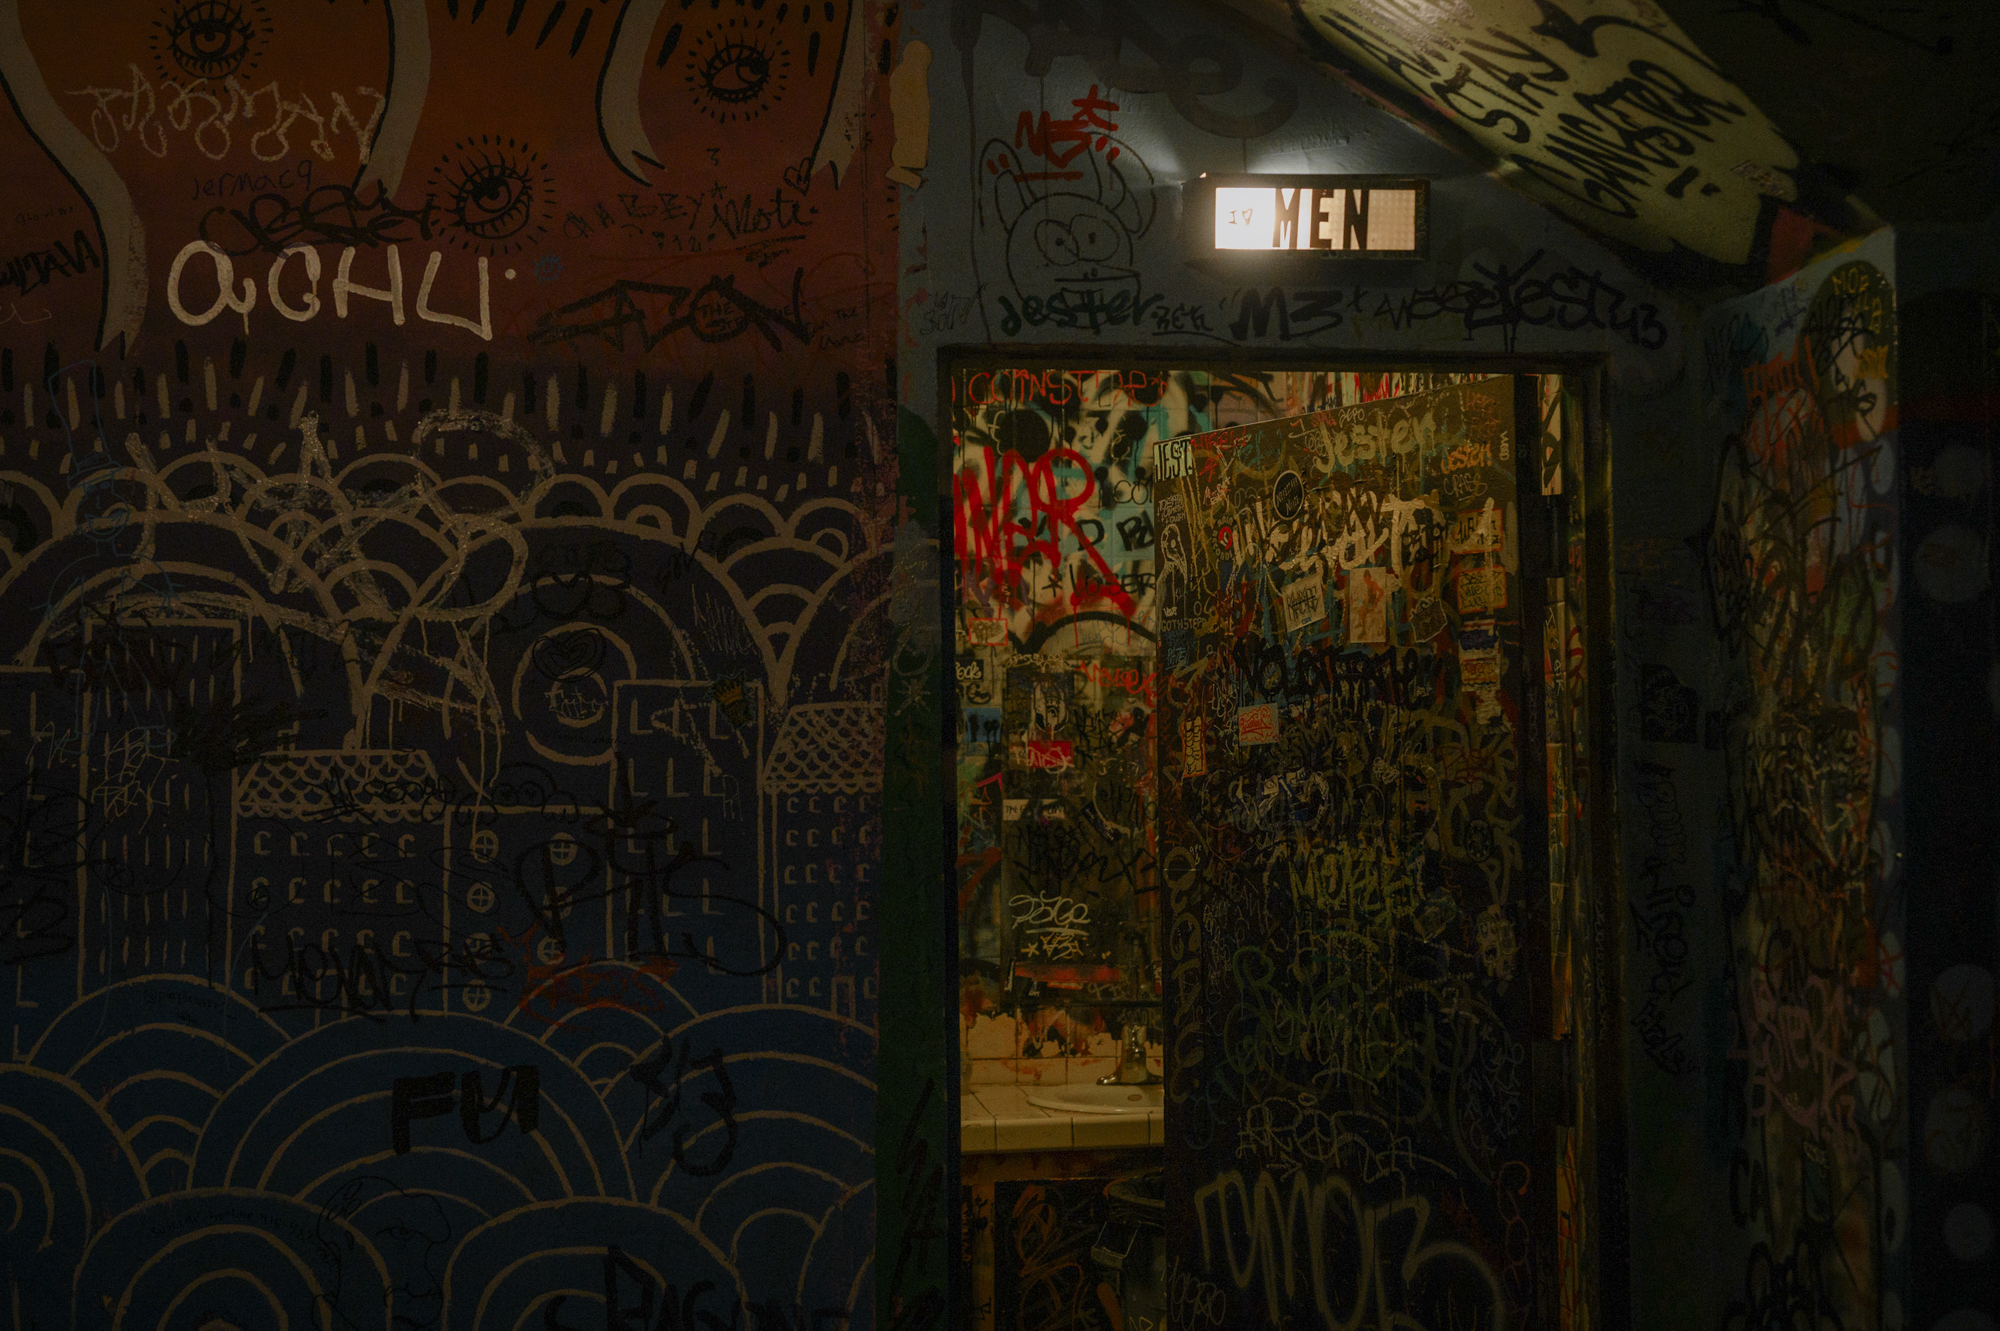 Every inch of the wall outside the men's room is covered with graffiti. As is the door to the men's room, which stands ajar, and so is the wall inside.